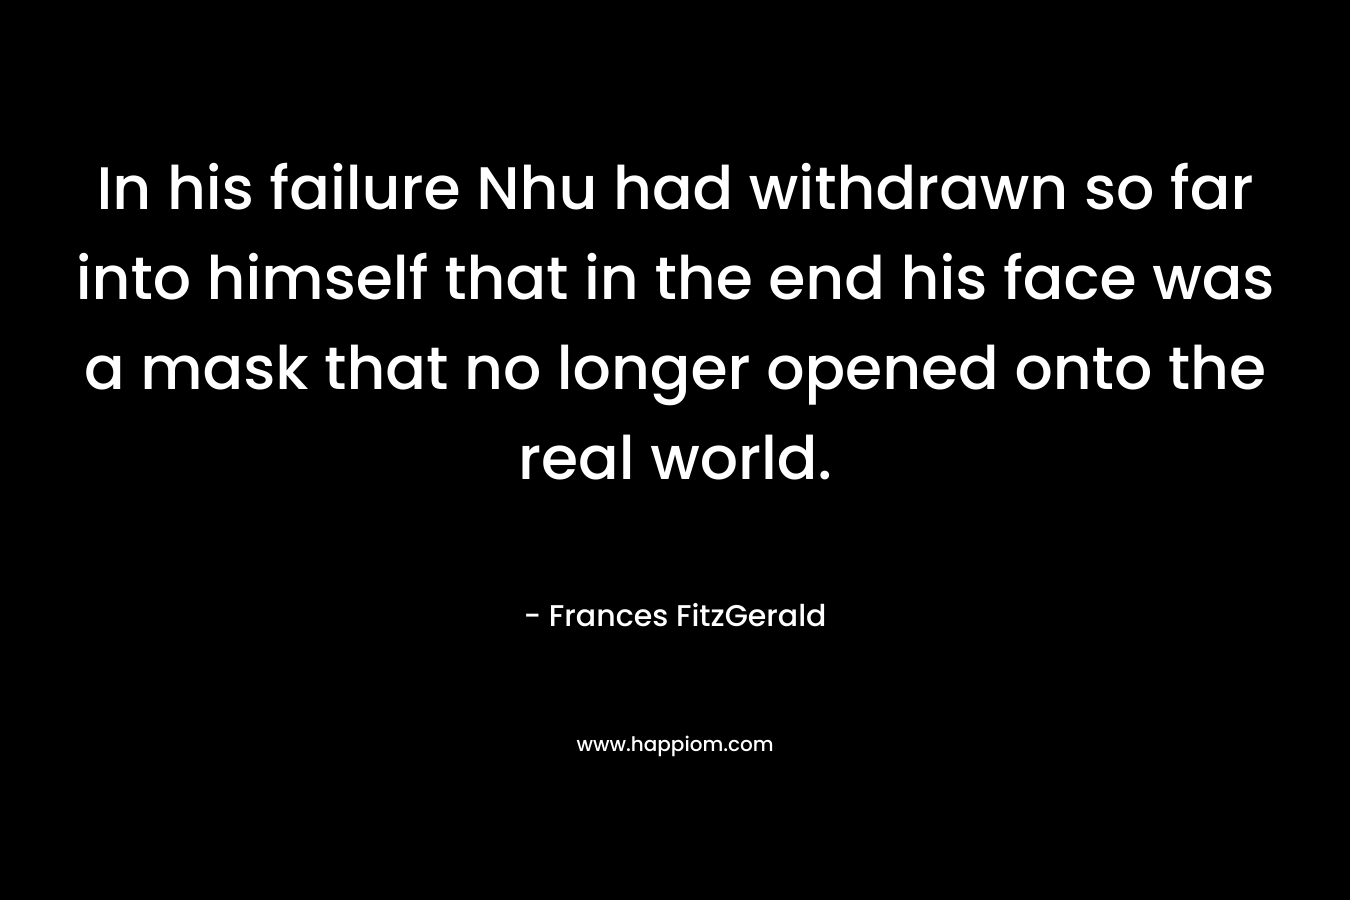 In his failure Nhu had withdrawn so far into himself that in the end his face was a mask that no longer opened onto the real world. – Frances FitzGerald